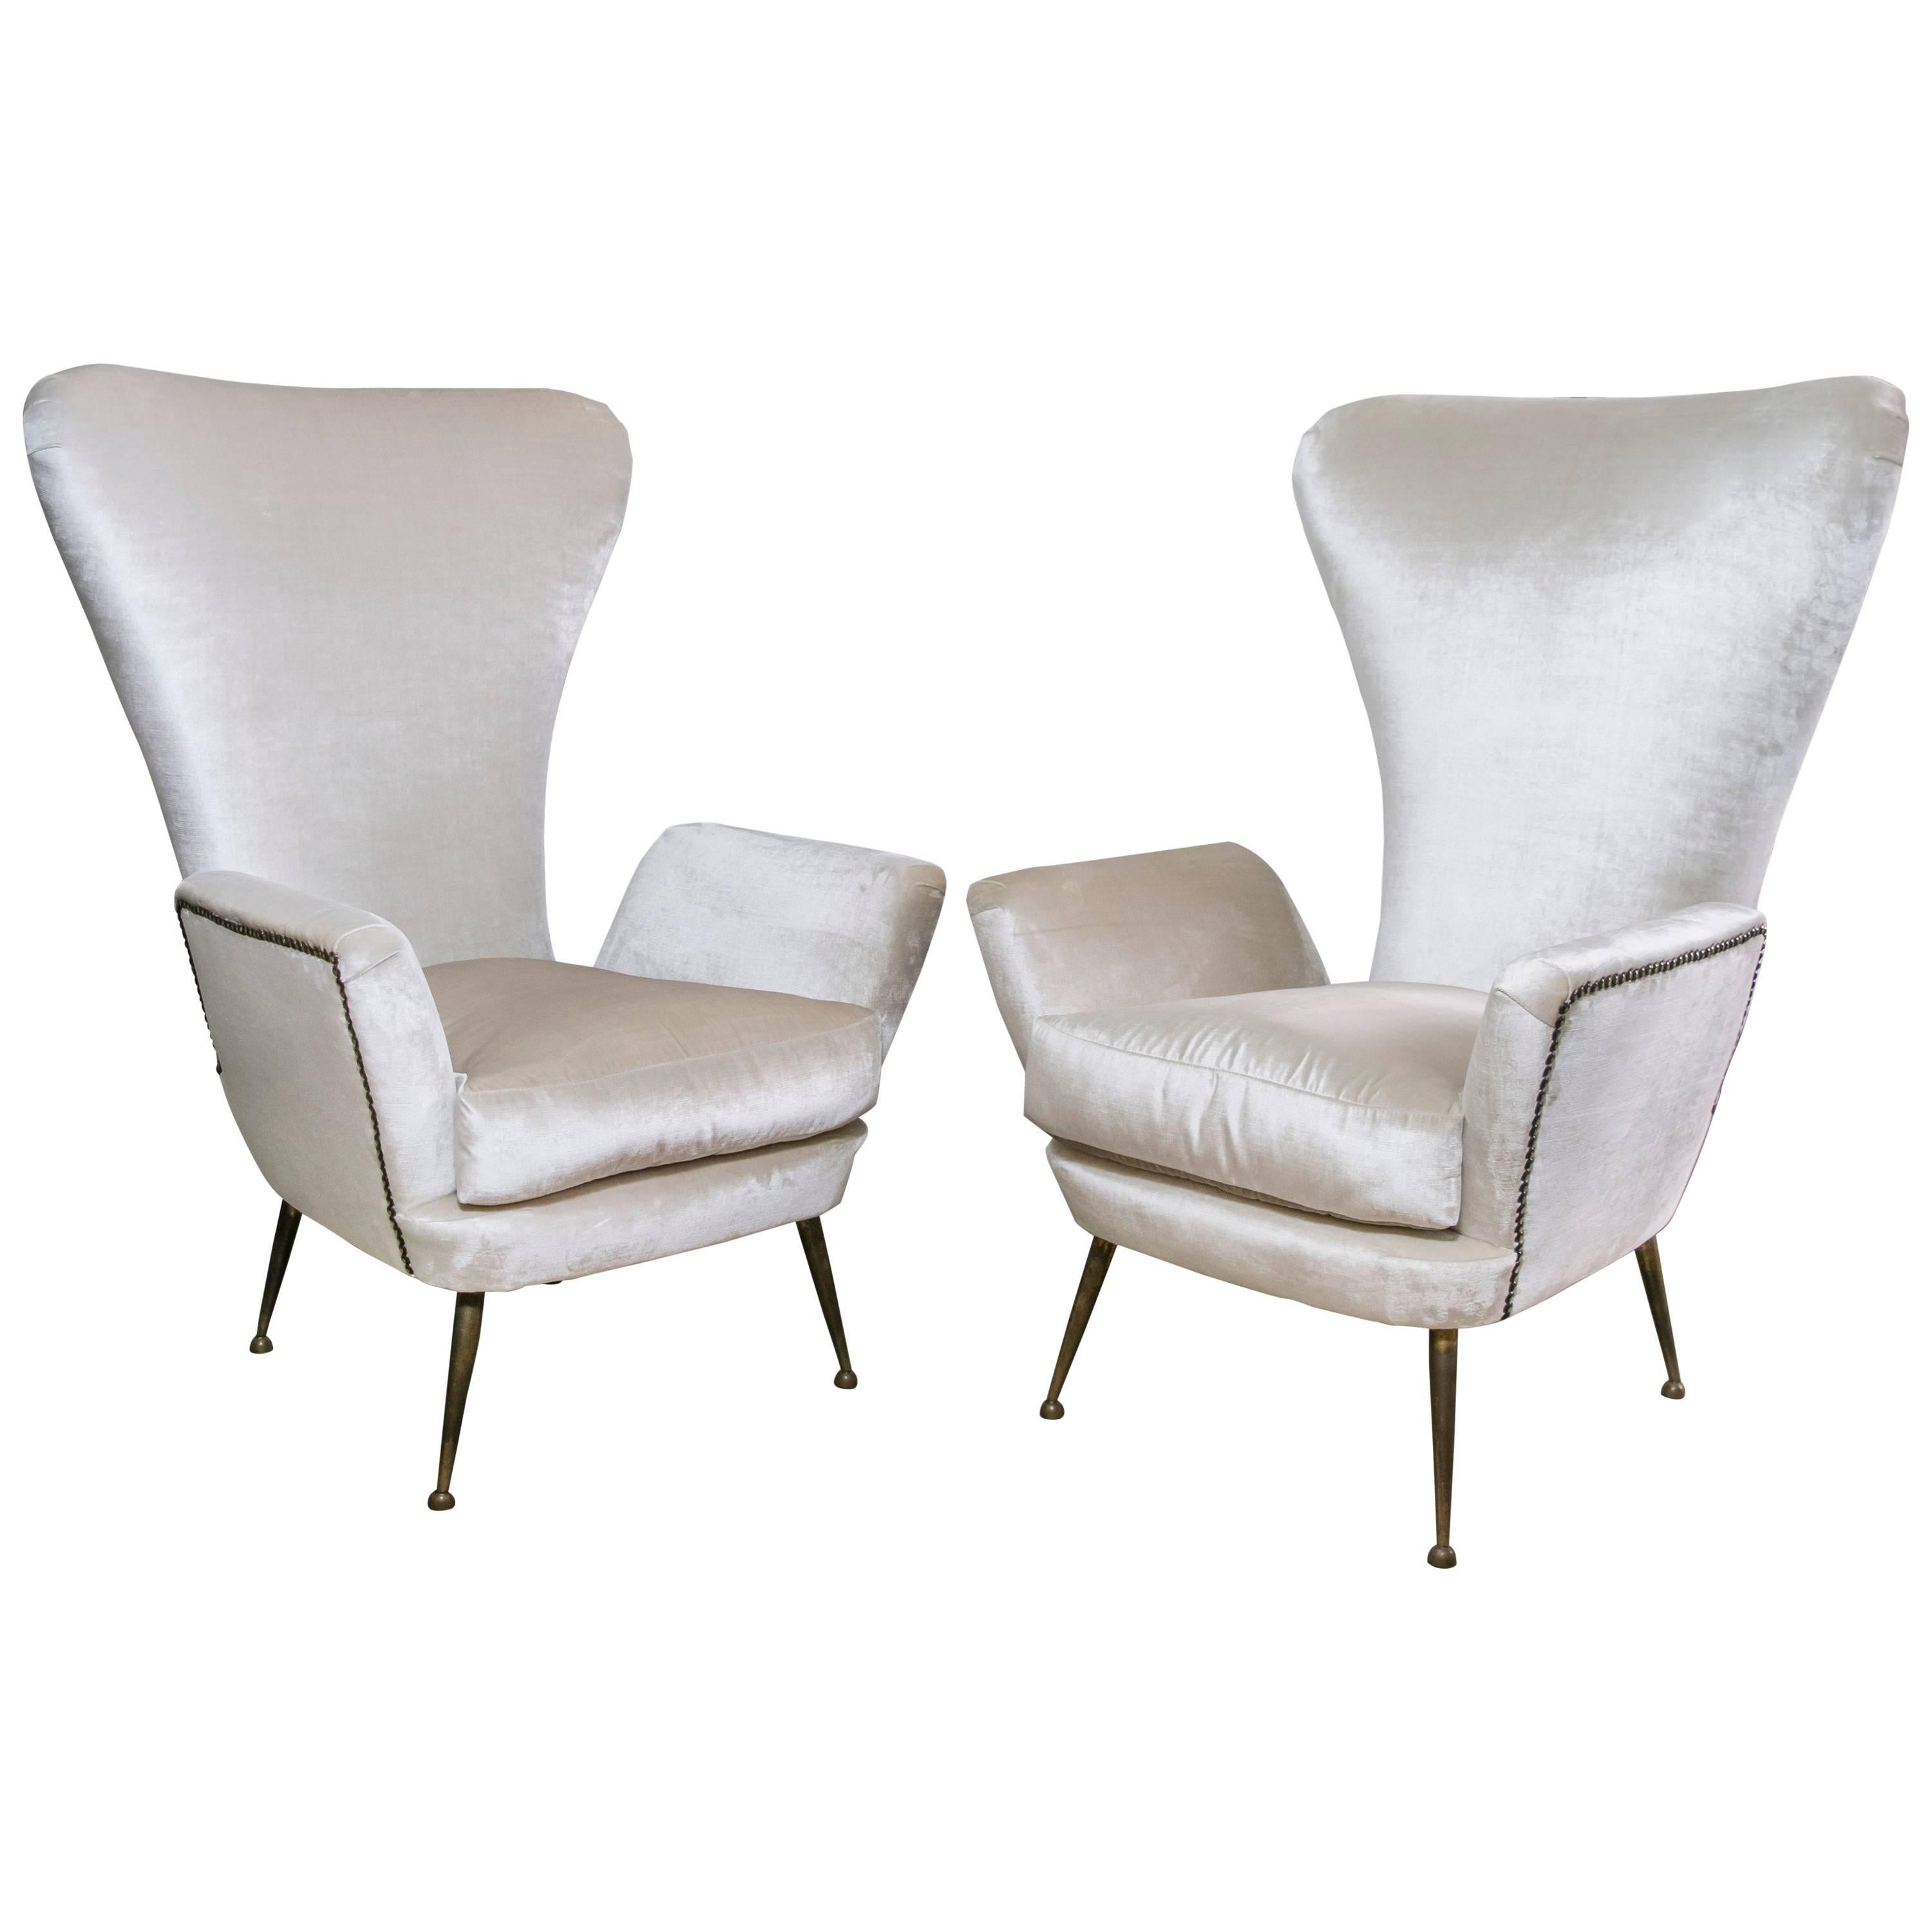 Pair of Paolo Buffa High Back Italian Chairs in Cream Velvet For Sale